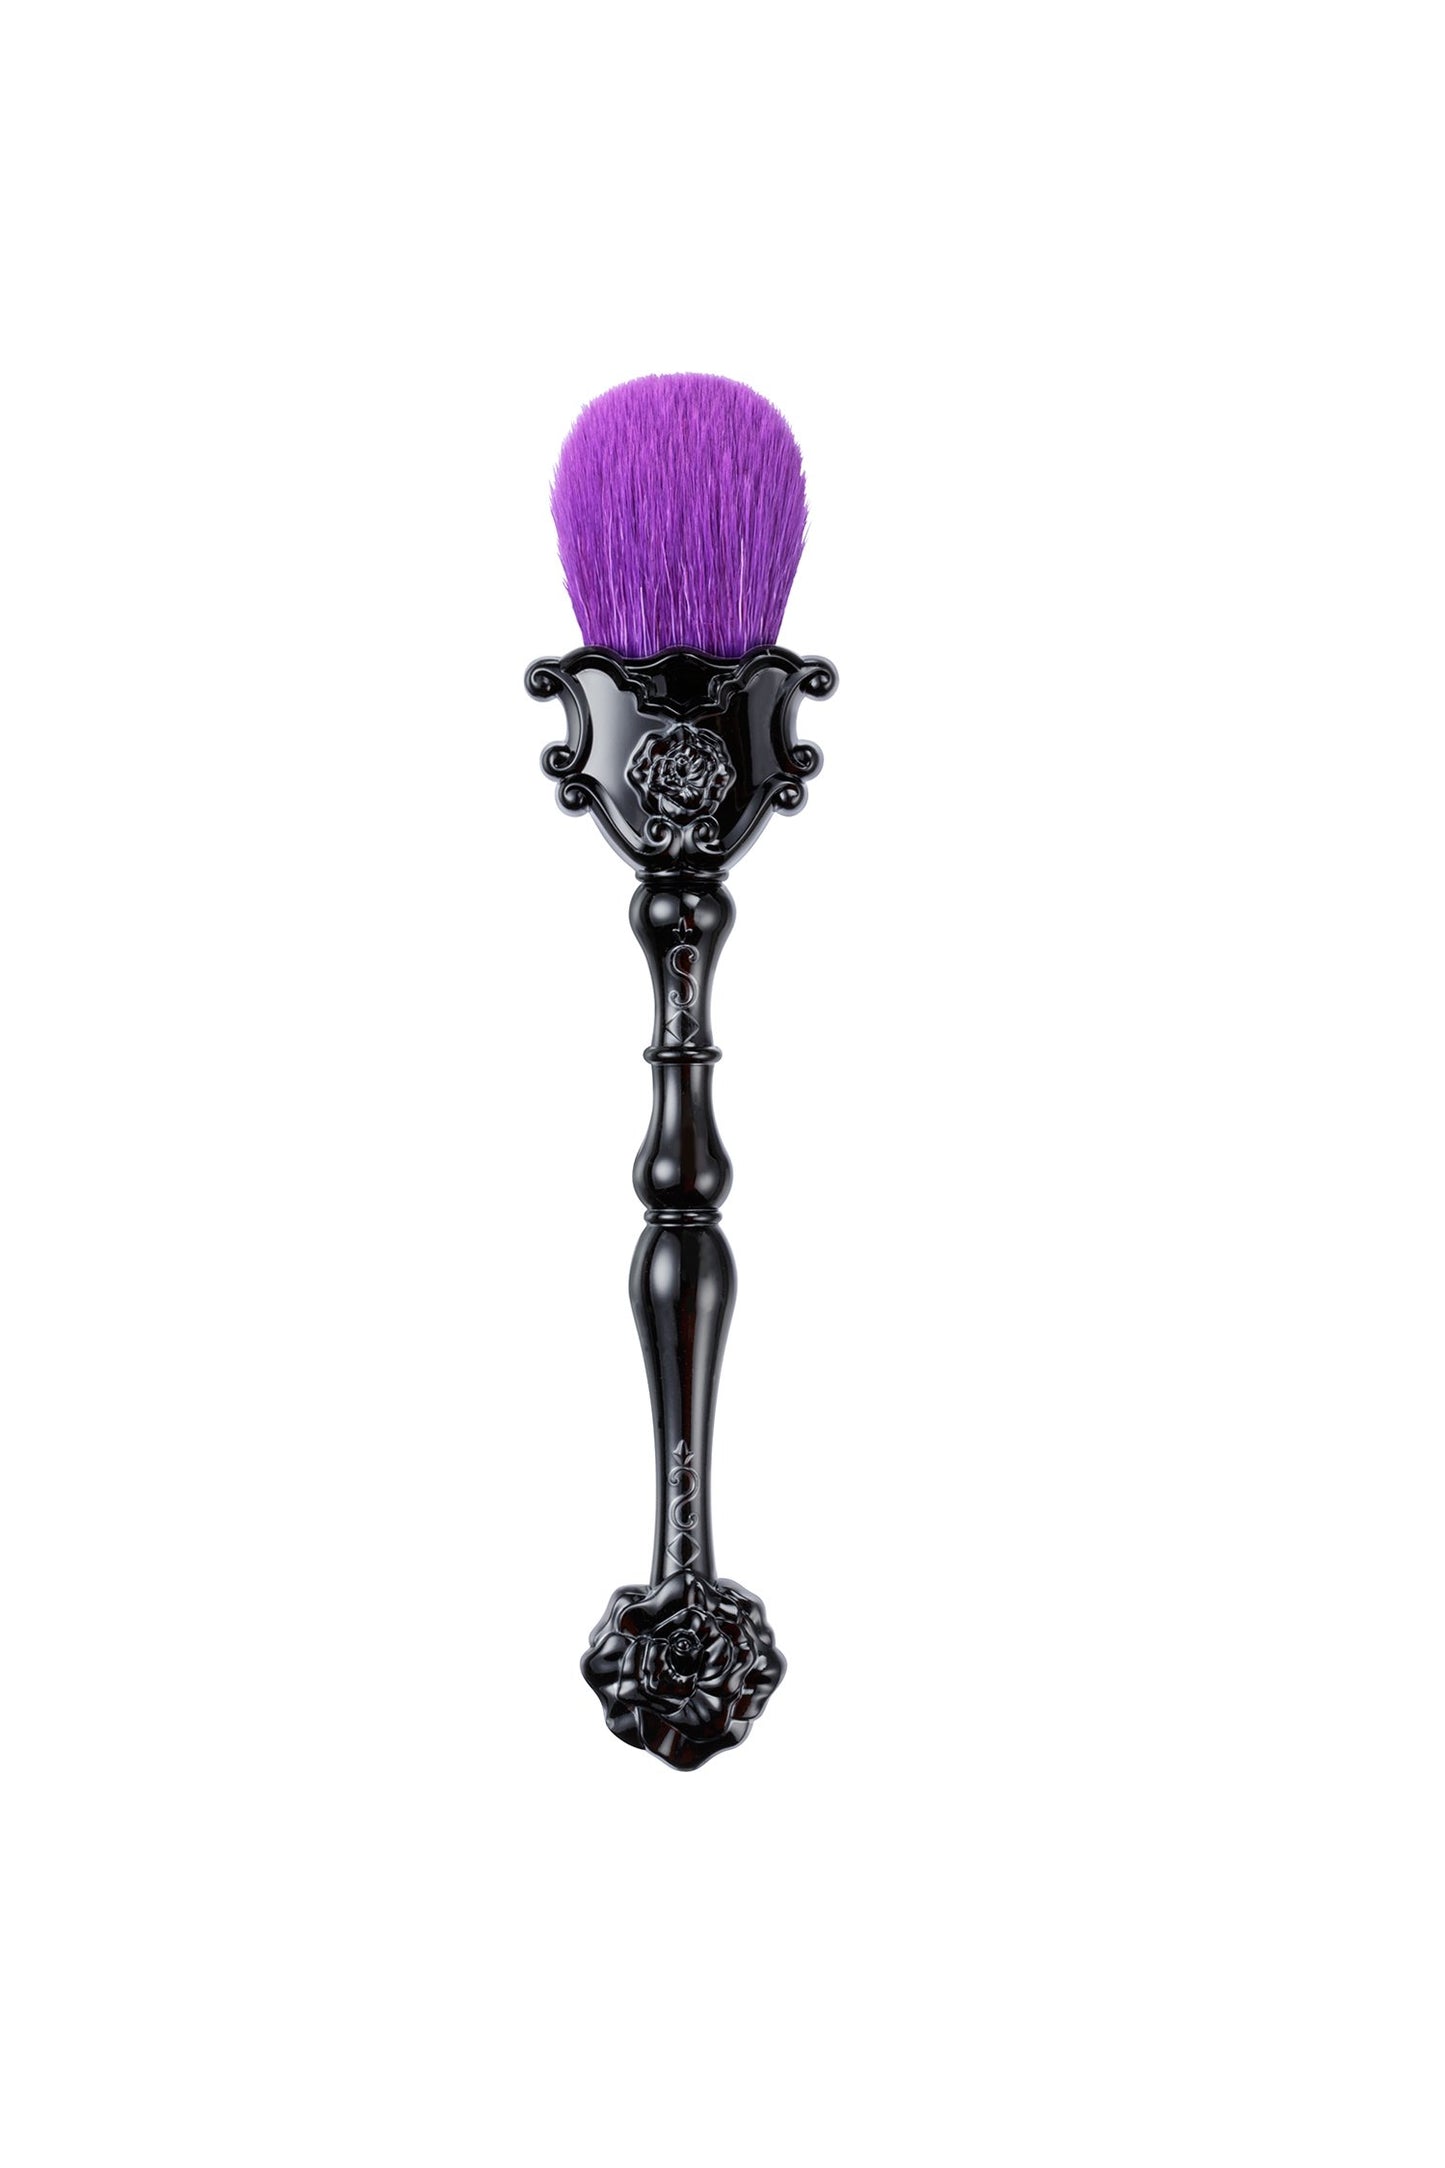 Vanity Face Brush, a purple brush on a stylish high support with raised floral design